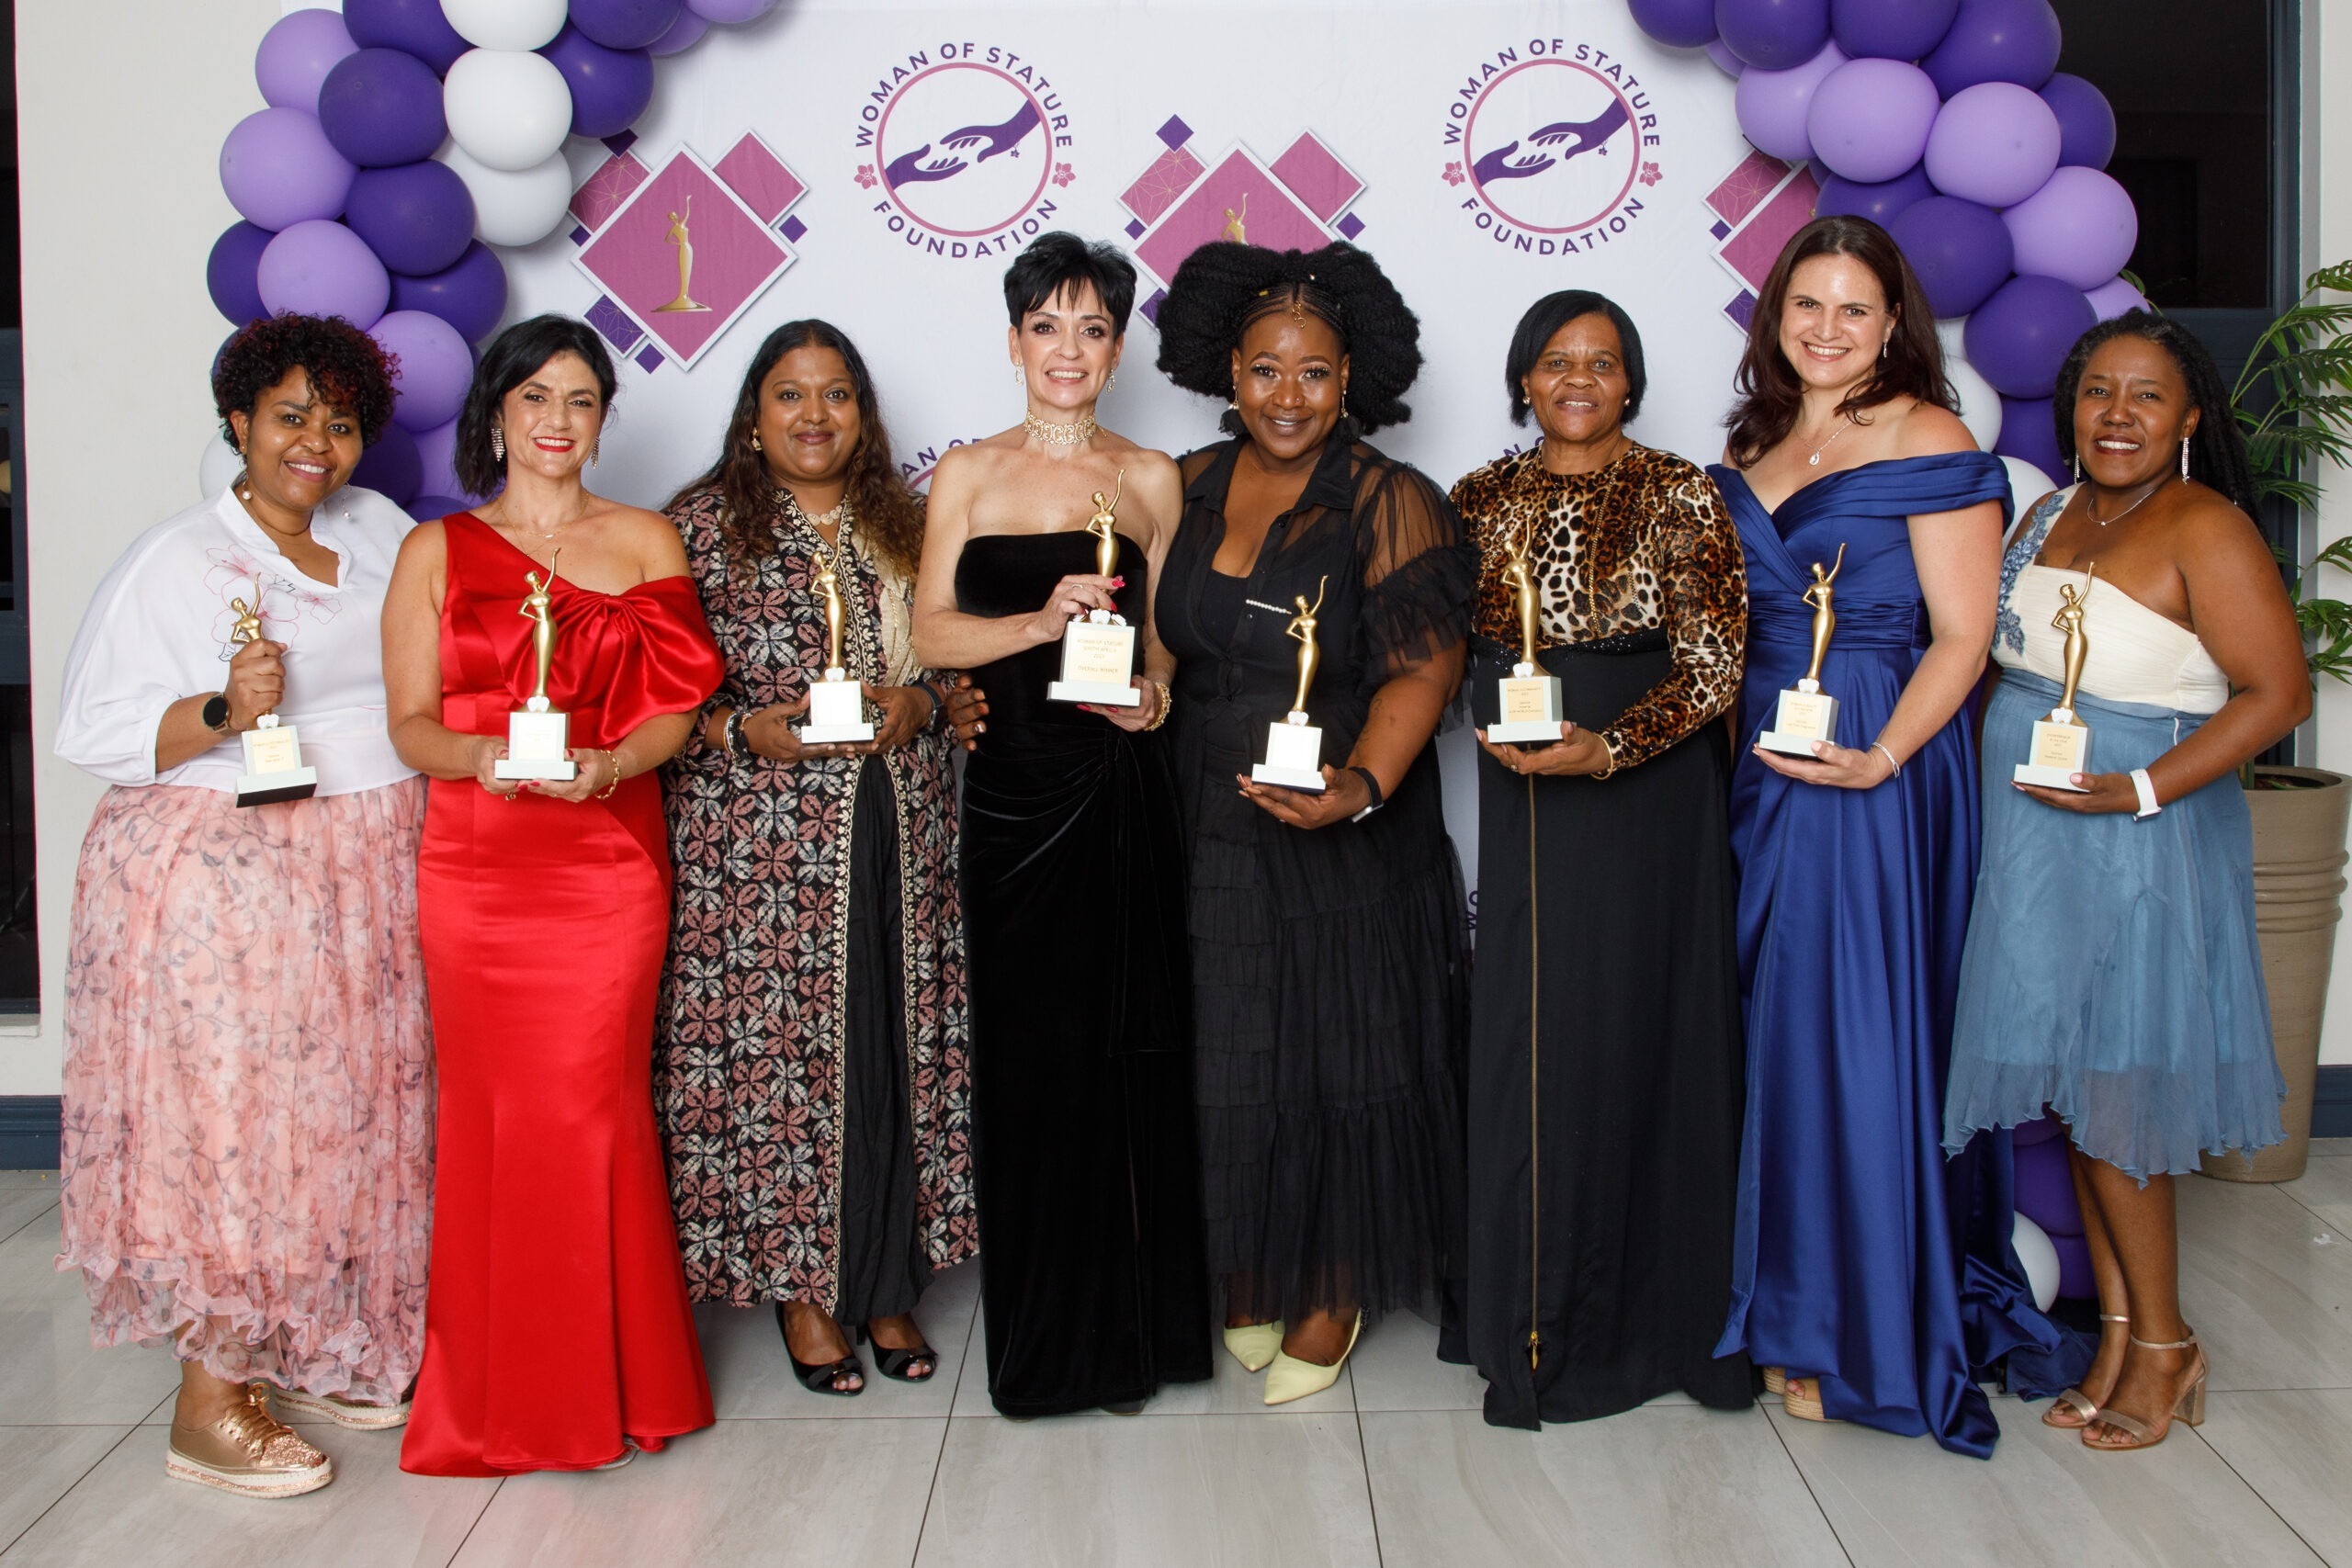 <h1>WOMAN OF STATURE AWARDS</h1>